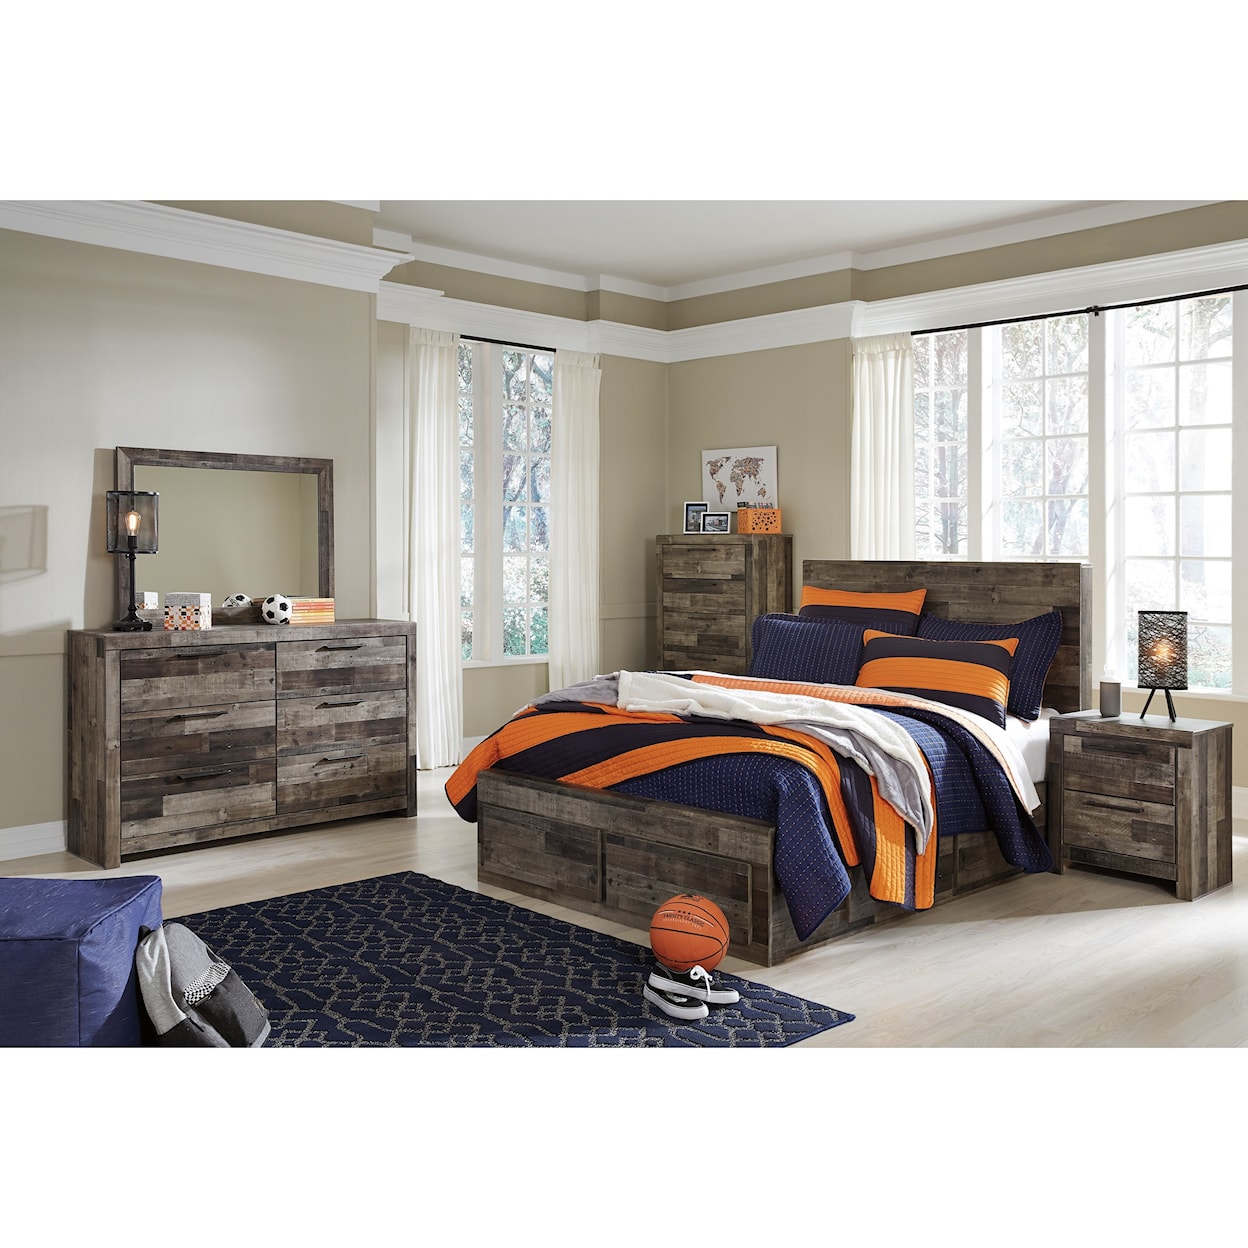 Benchcraft by Ashley Derekson Full Storage Bed with 6 Drawers